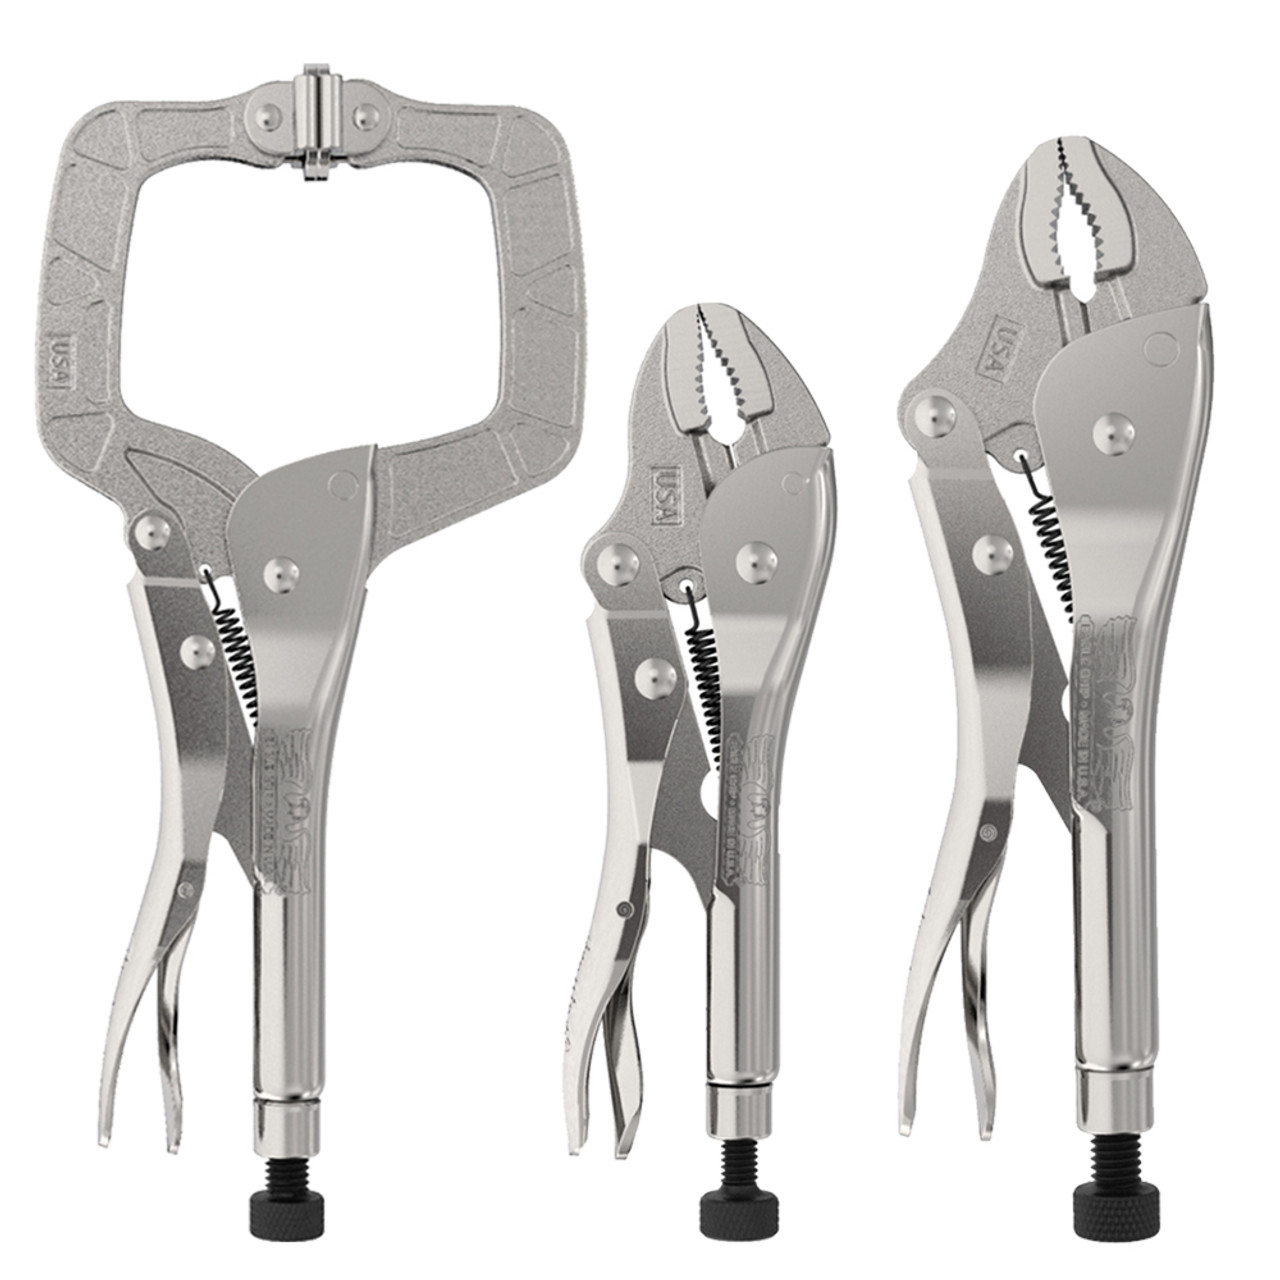 Eagle Grip Locking Tools: Malco Products New Line - Roofing Elements